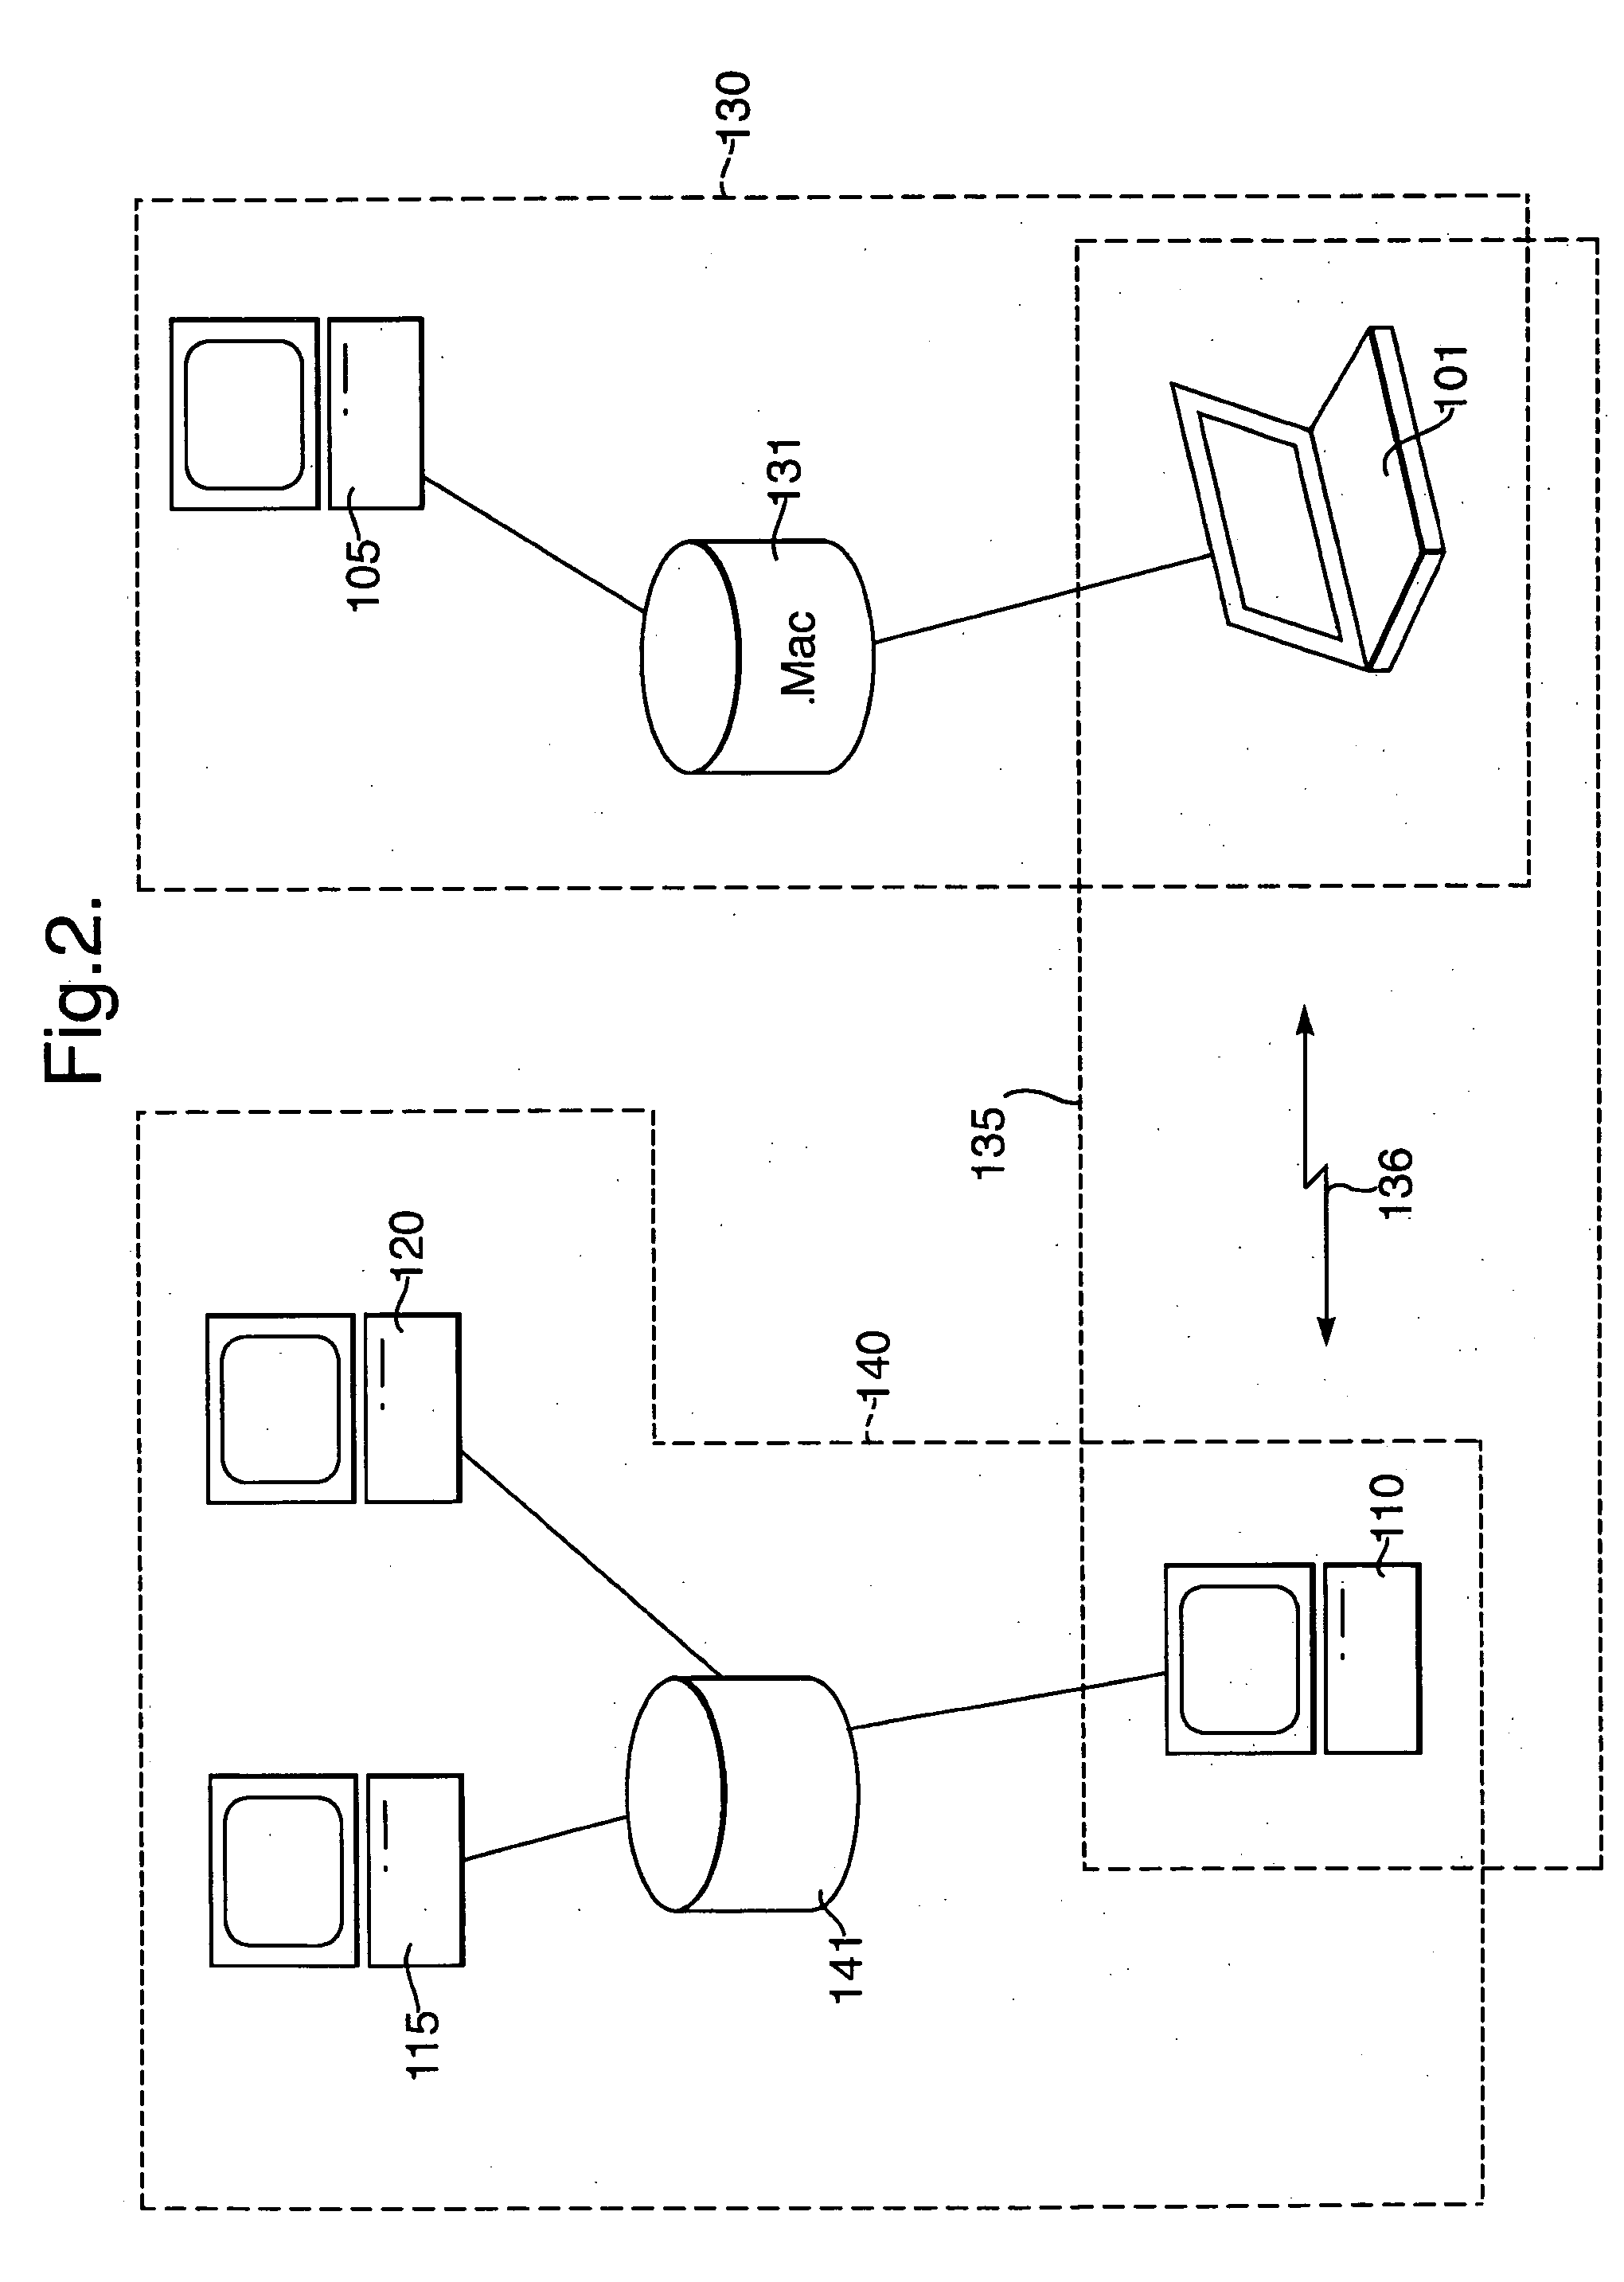 Method for sharing groups of objects